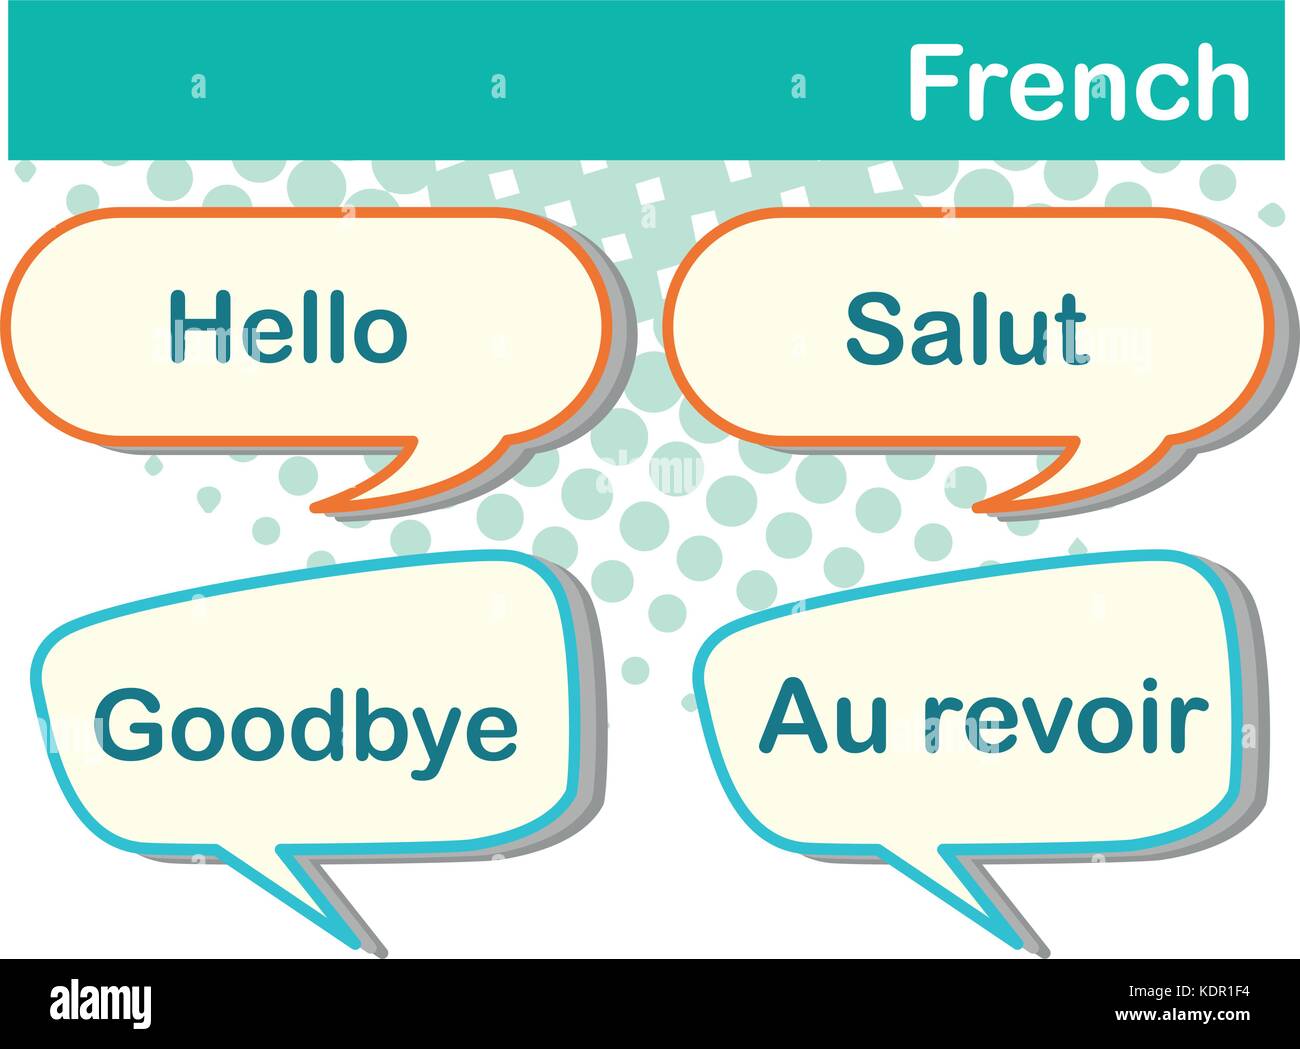 Different expressions in French language illustration Stock Vector ...